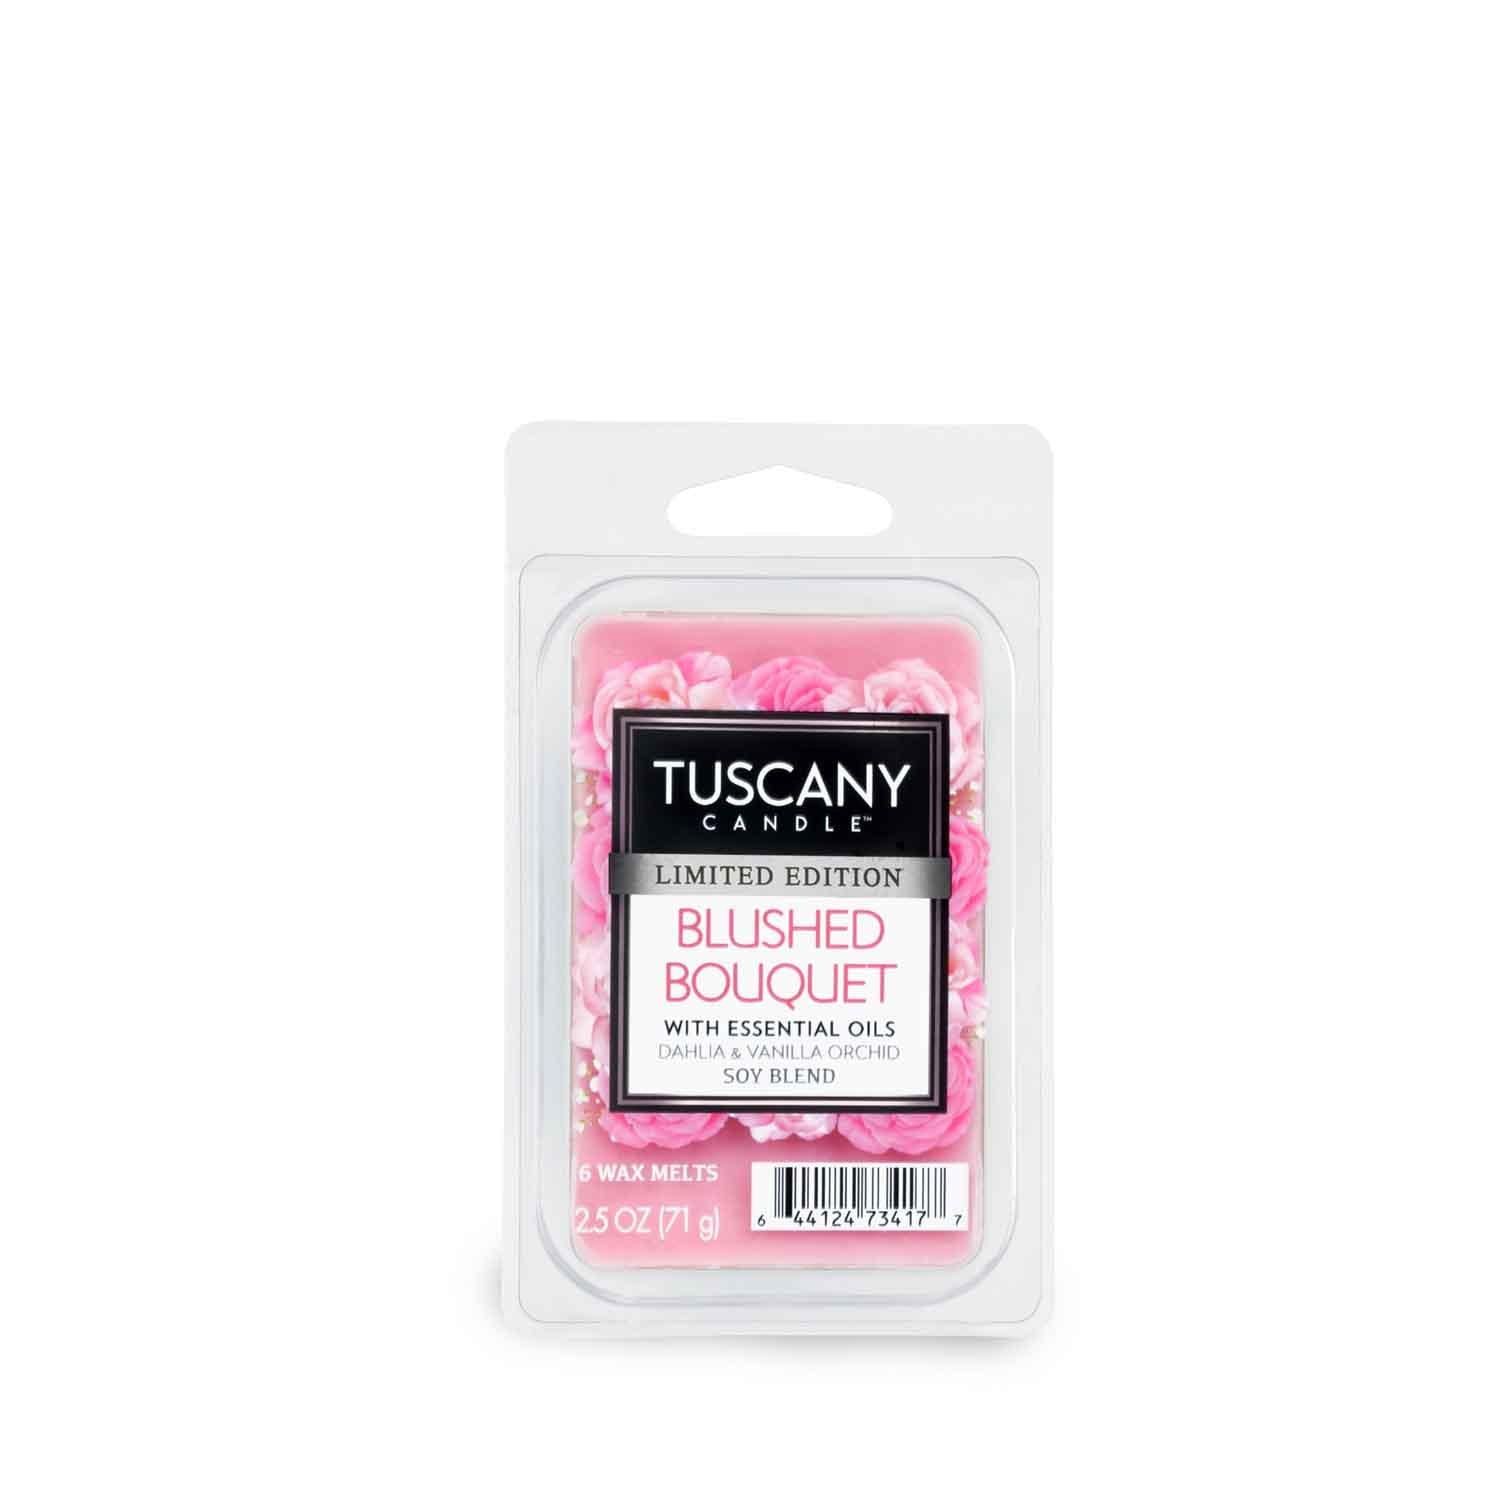 Blushed Bouquet scented wax melt (2.5 oz) from Tuscany Candle®.